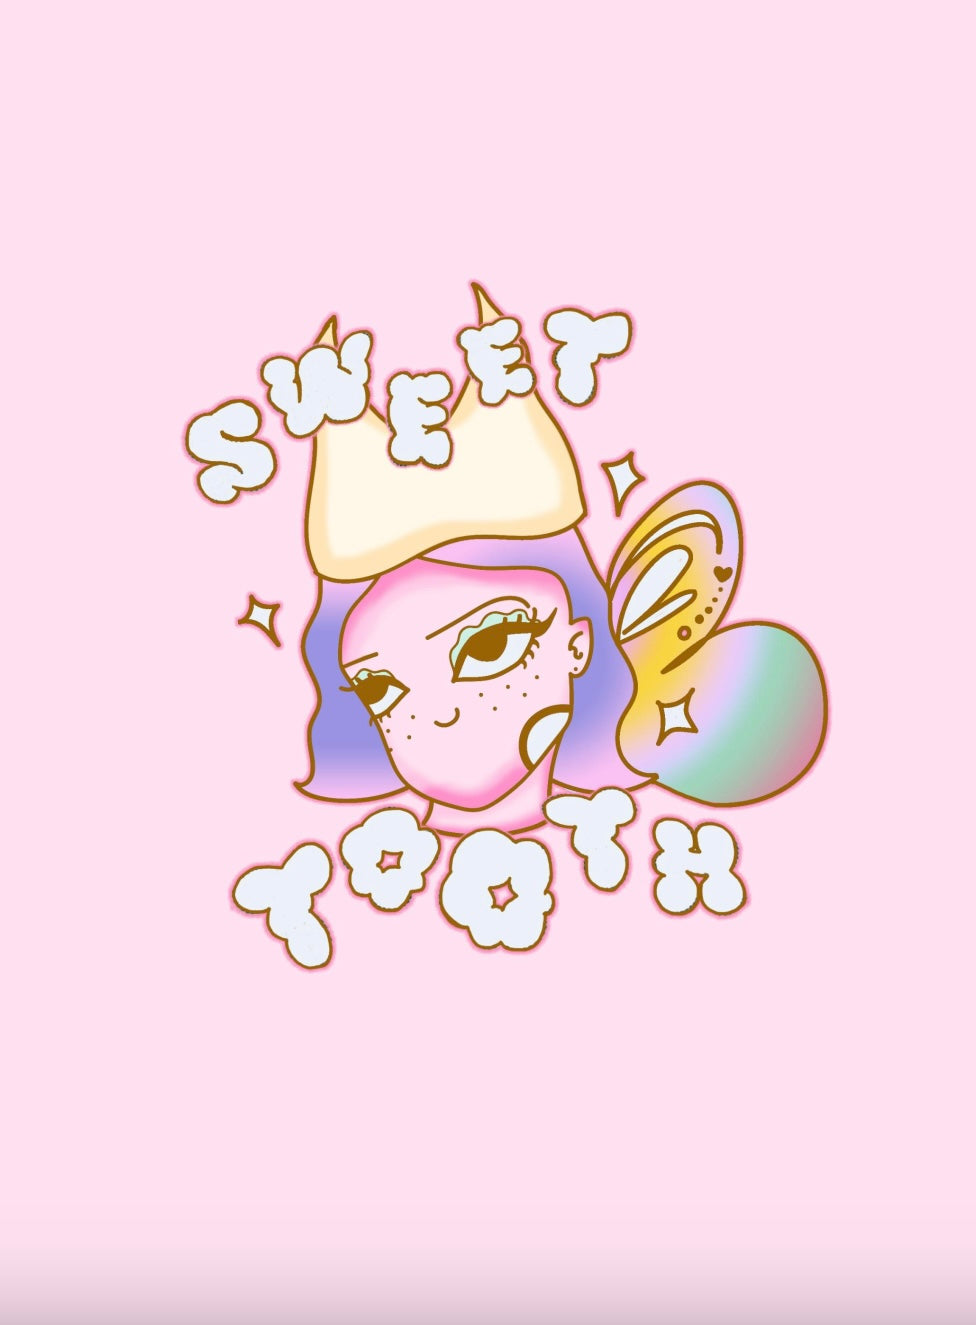 Sweet Tooth - Do you want me now?